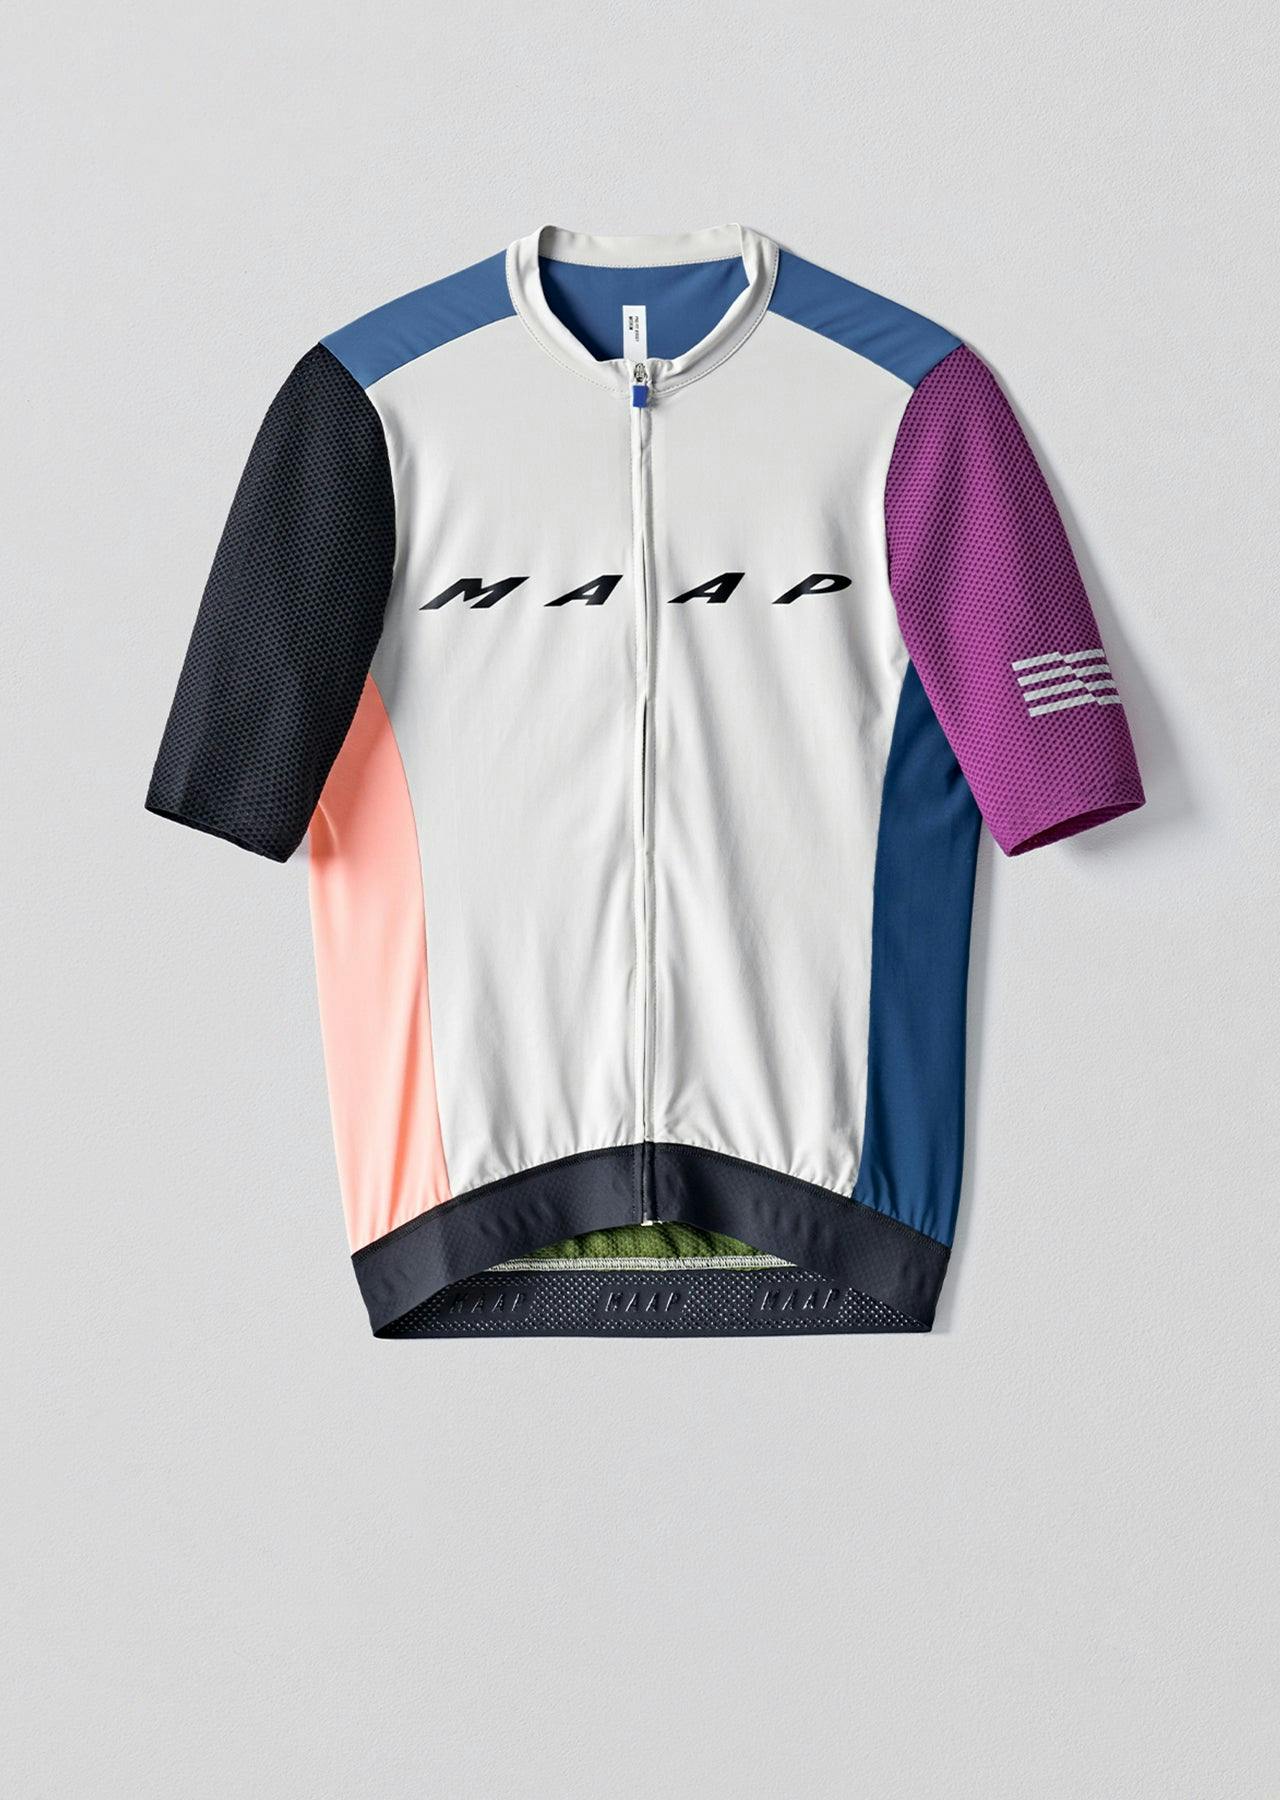 Evade OffCuts Pro Jersey